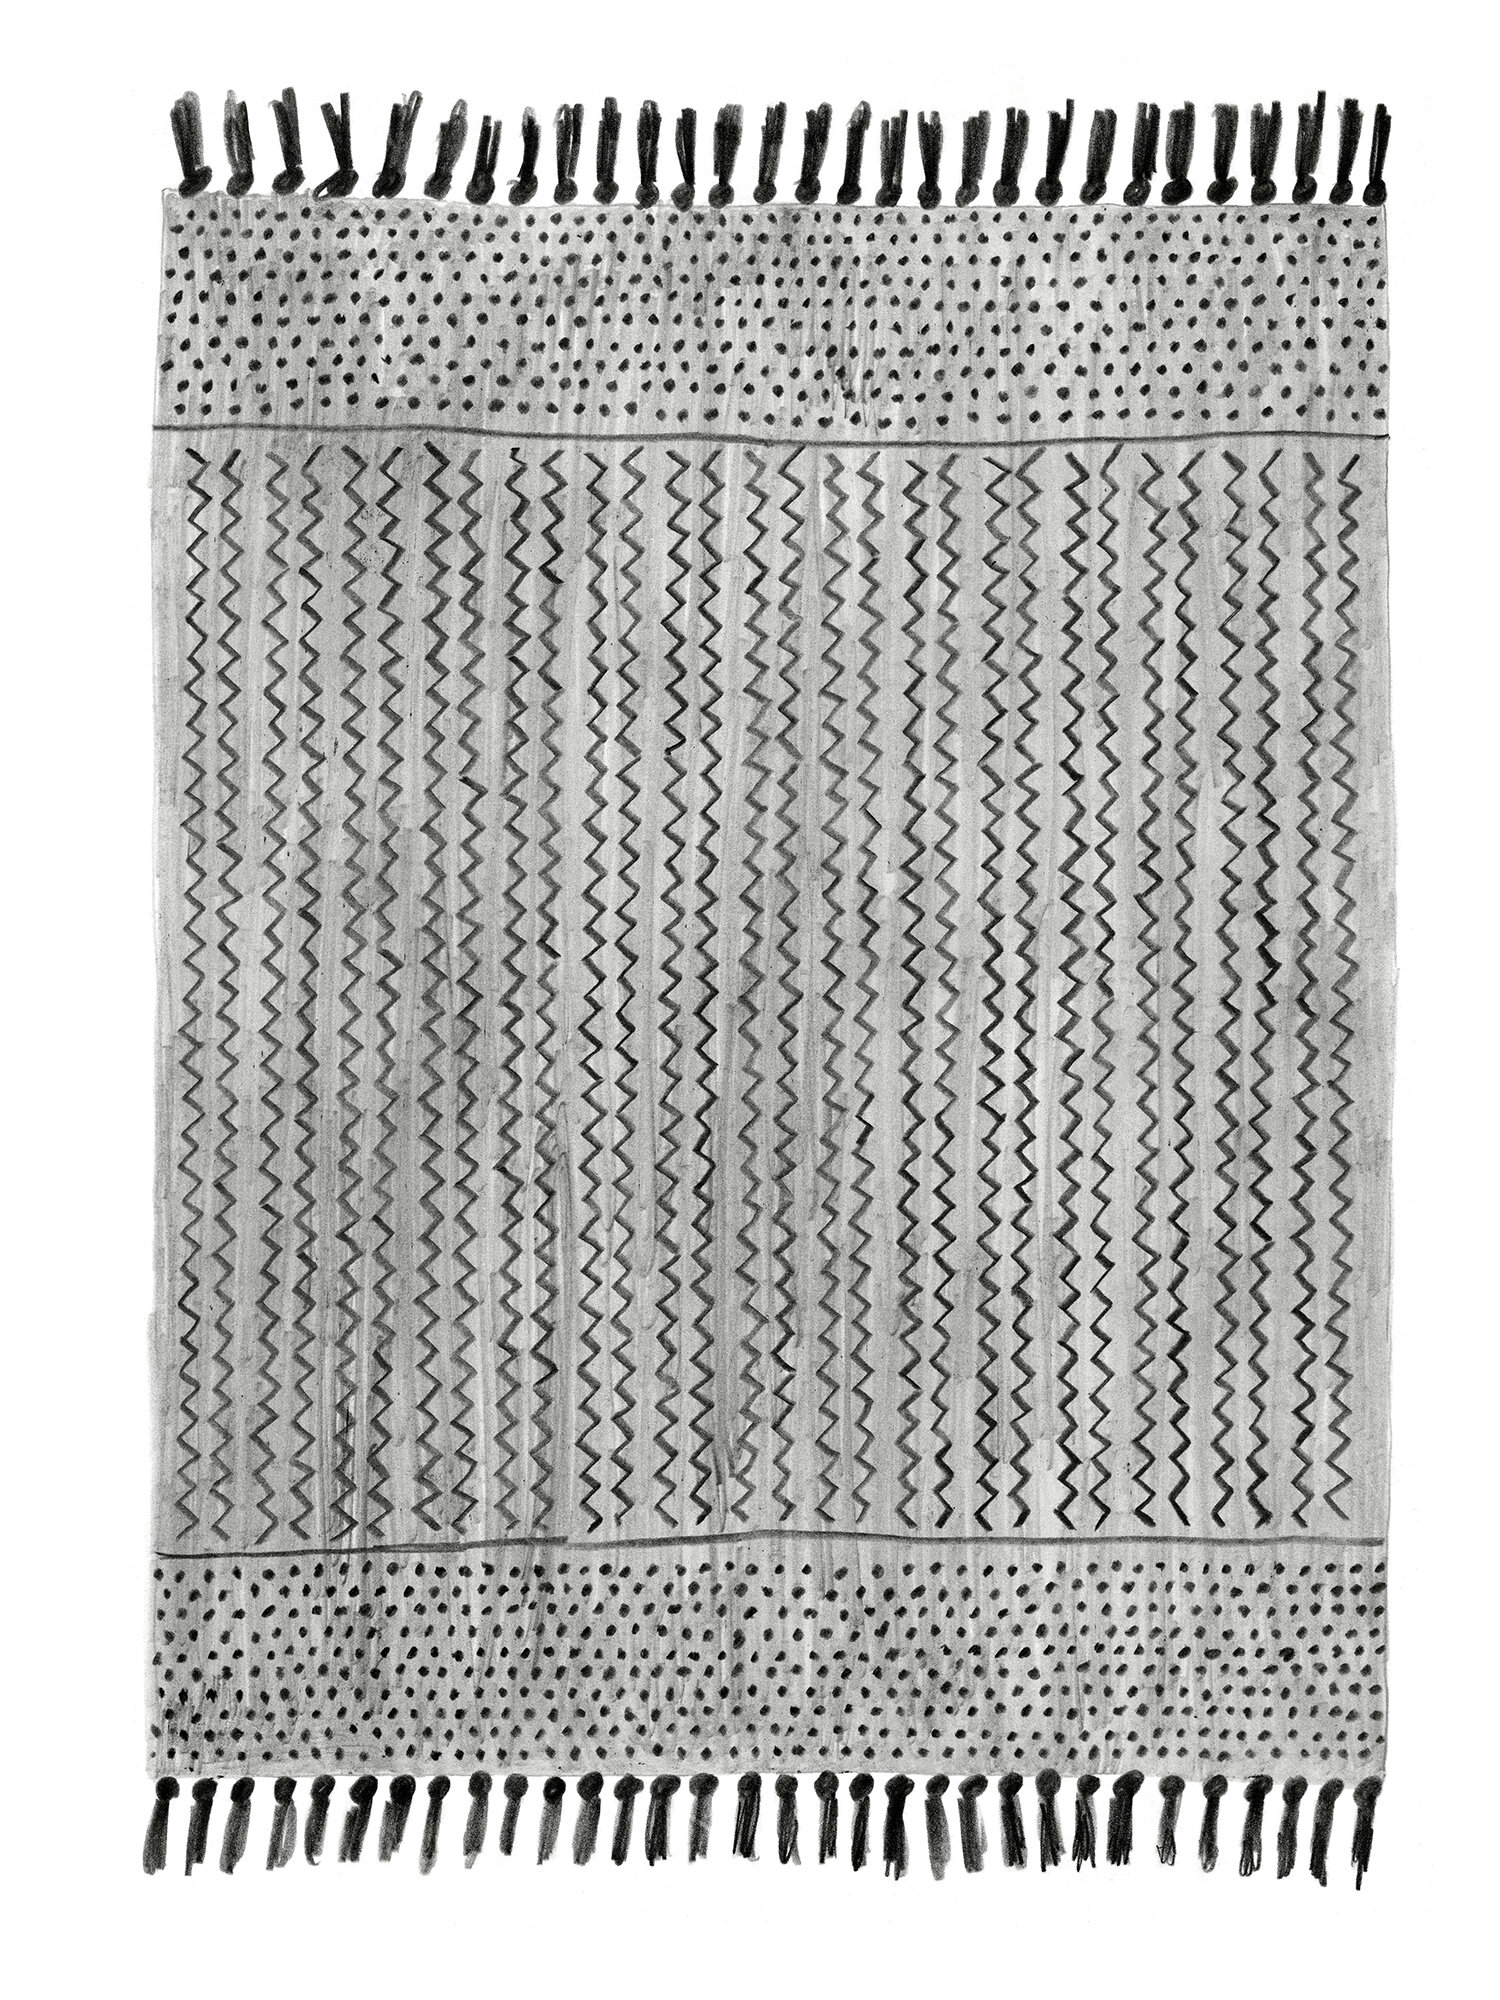   Dots &amp; Zig-Zags Rug   Pencil on paper 12 x 9 inches   